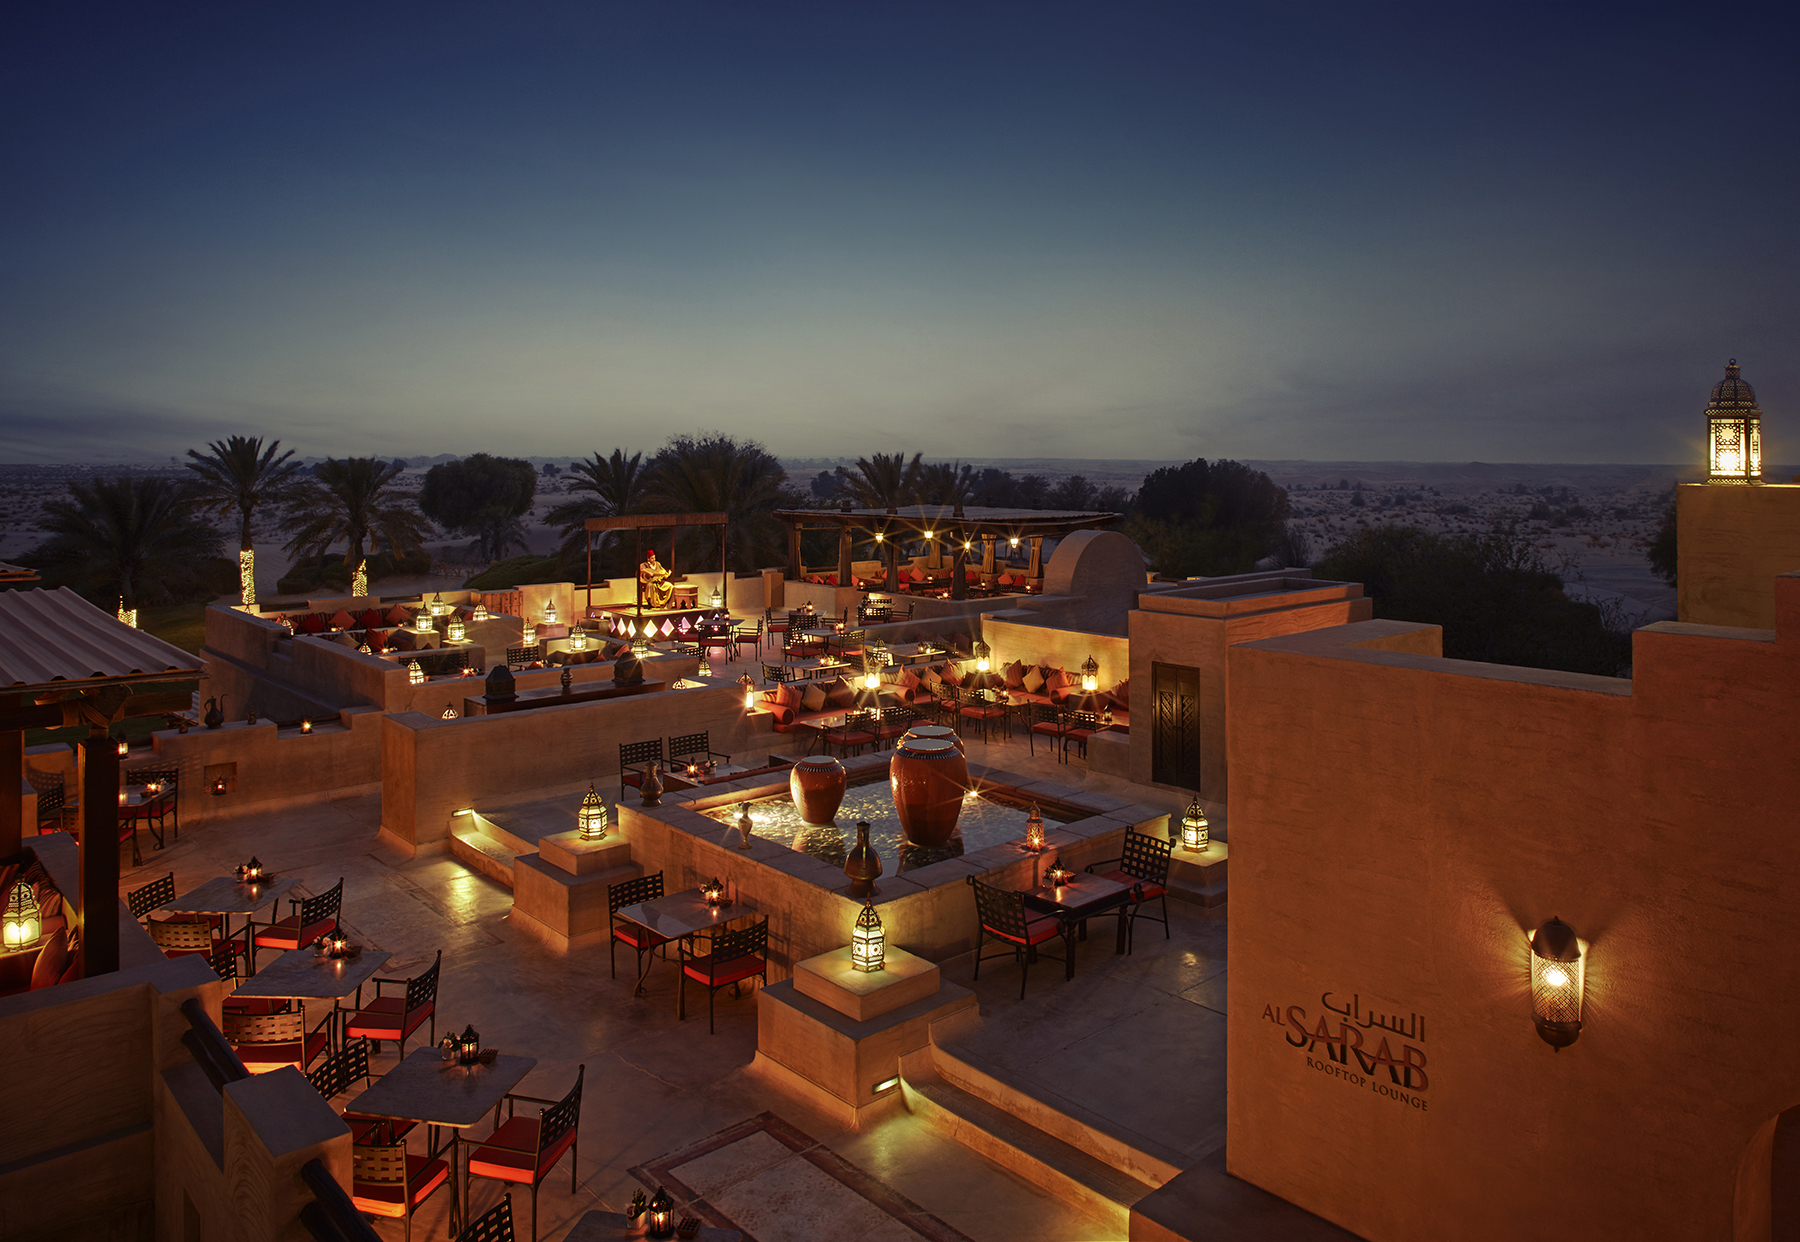 BAS_Dining_Al Sarab Rooftop Lounge_Overview